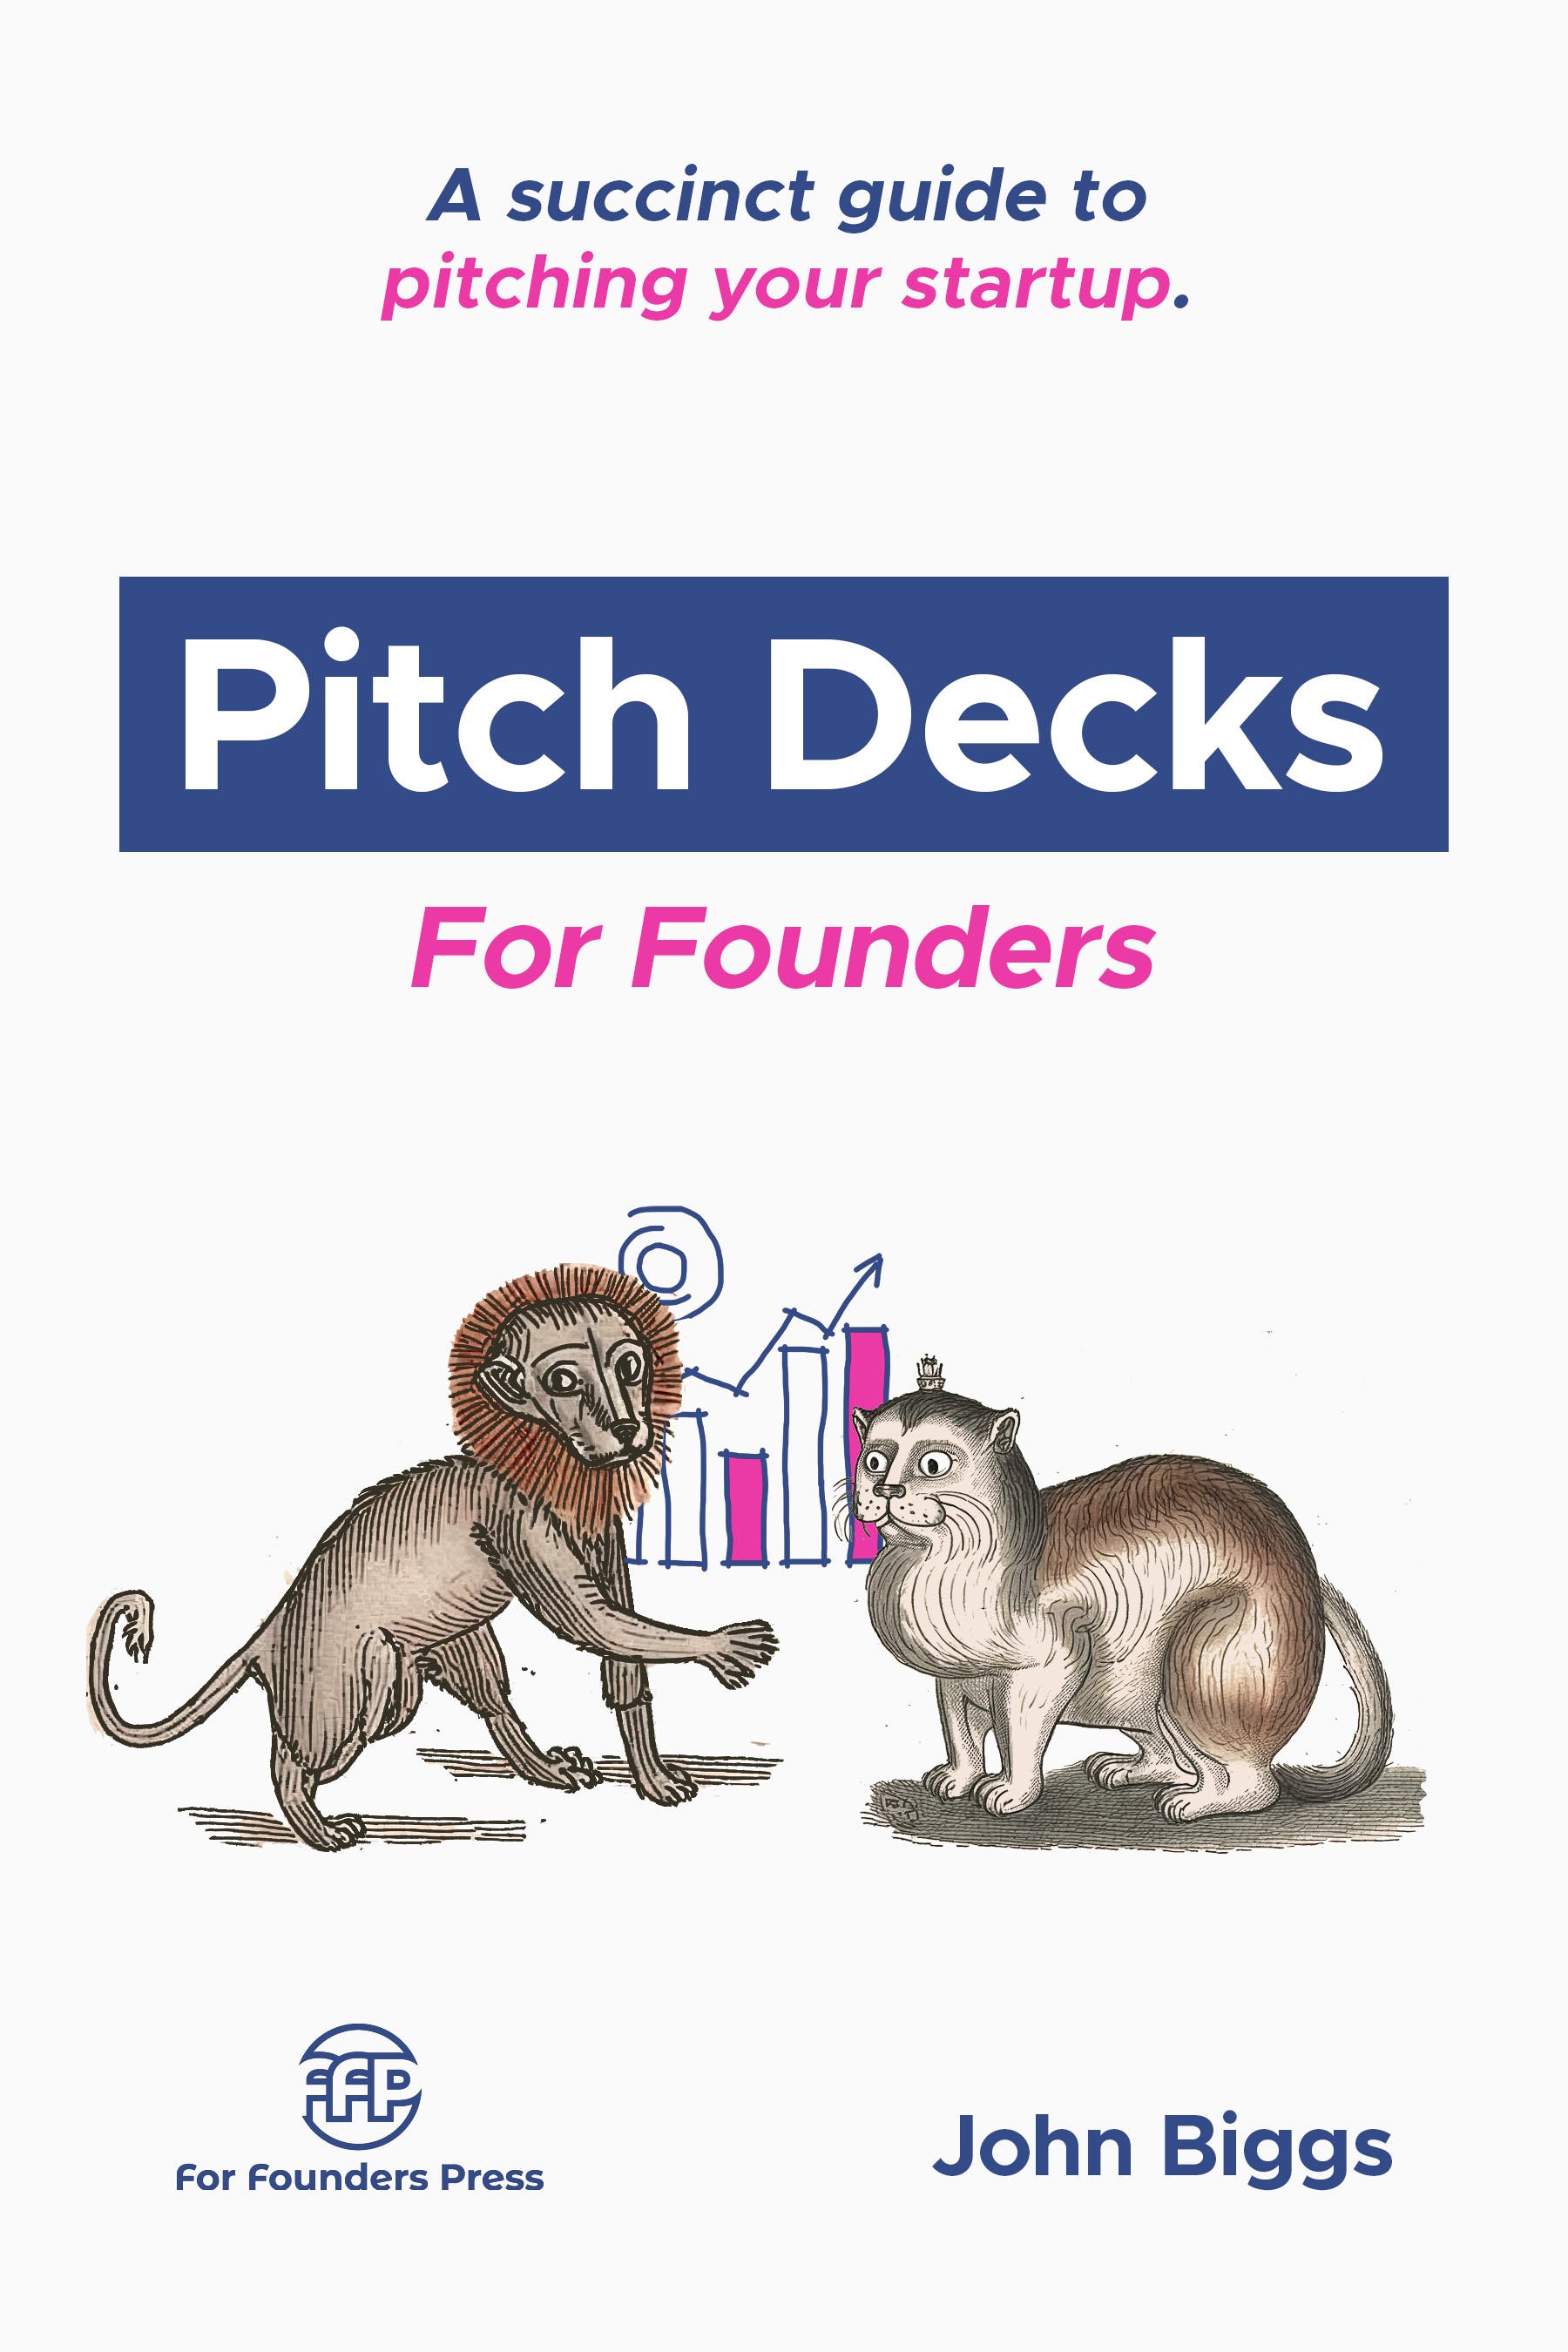 Pitch Decks for Founders media 1